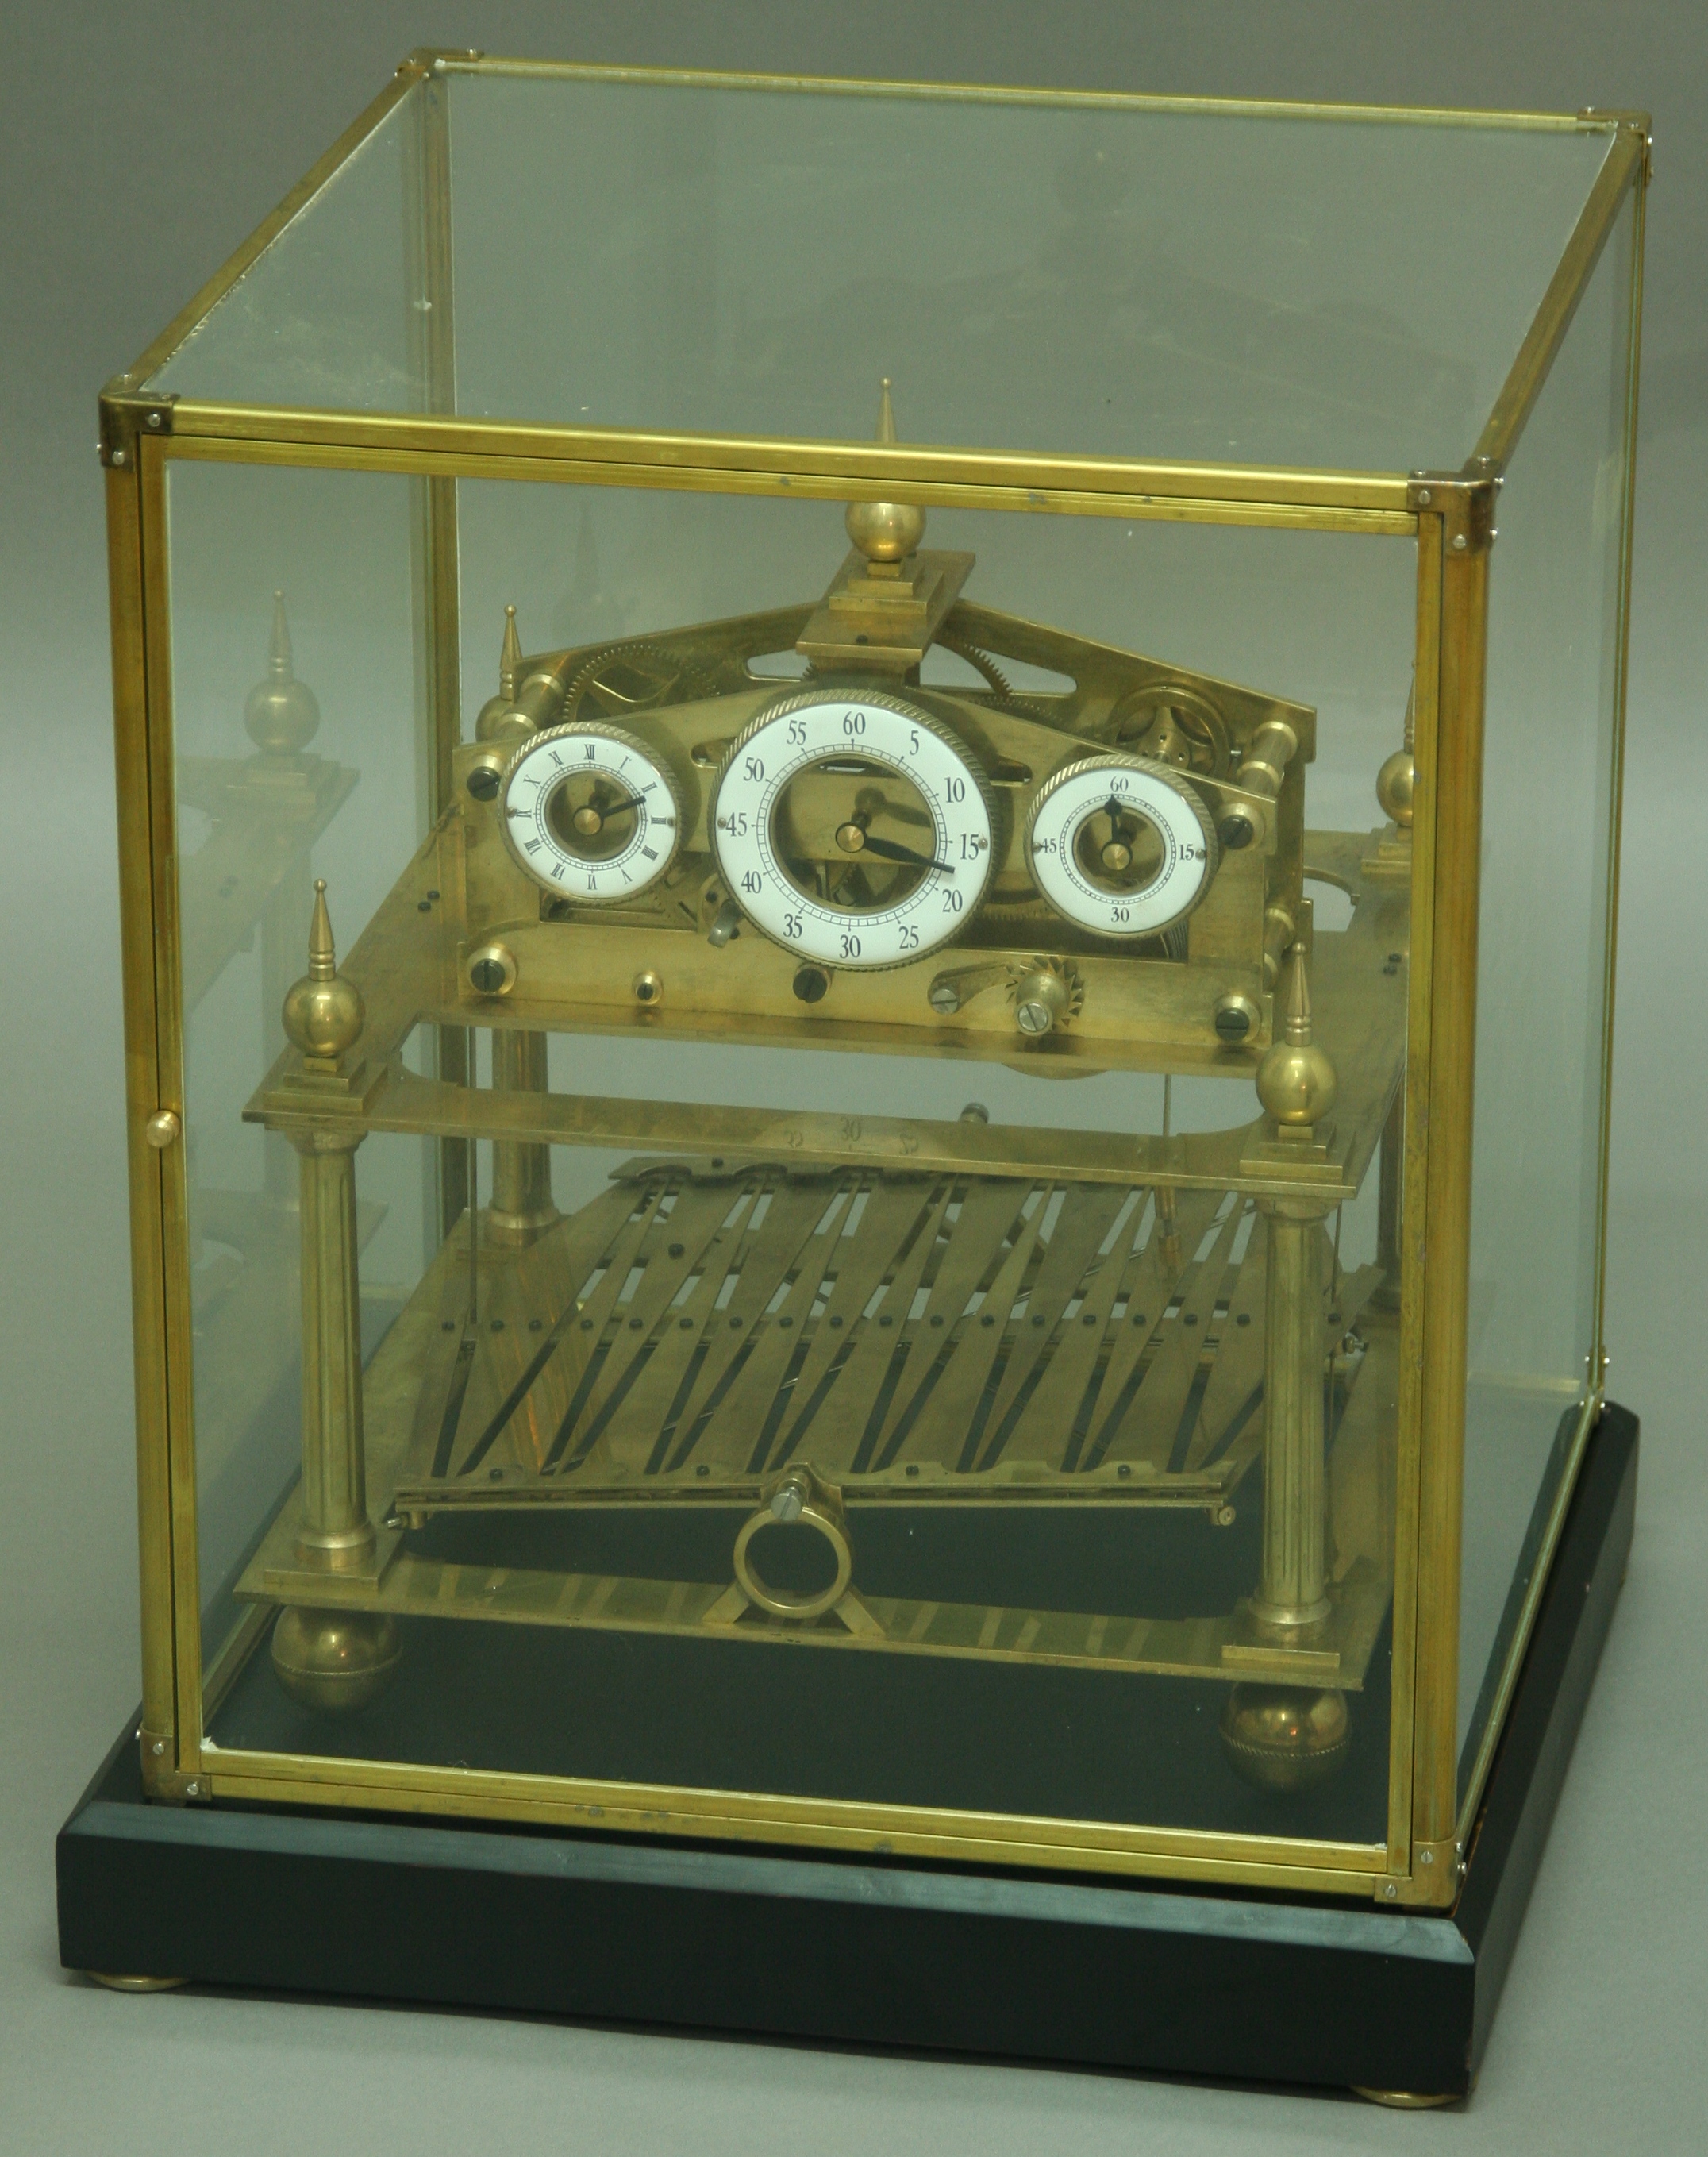 A BRASS CONGREVE ROLLING BALL CLOCK, 20th century, with triple enamelled dials on a single fusee